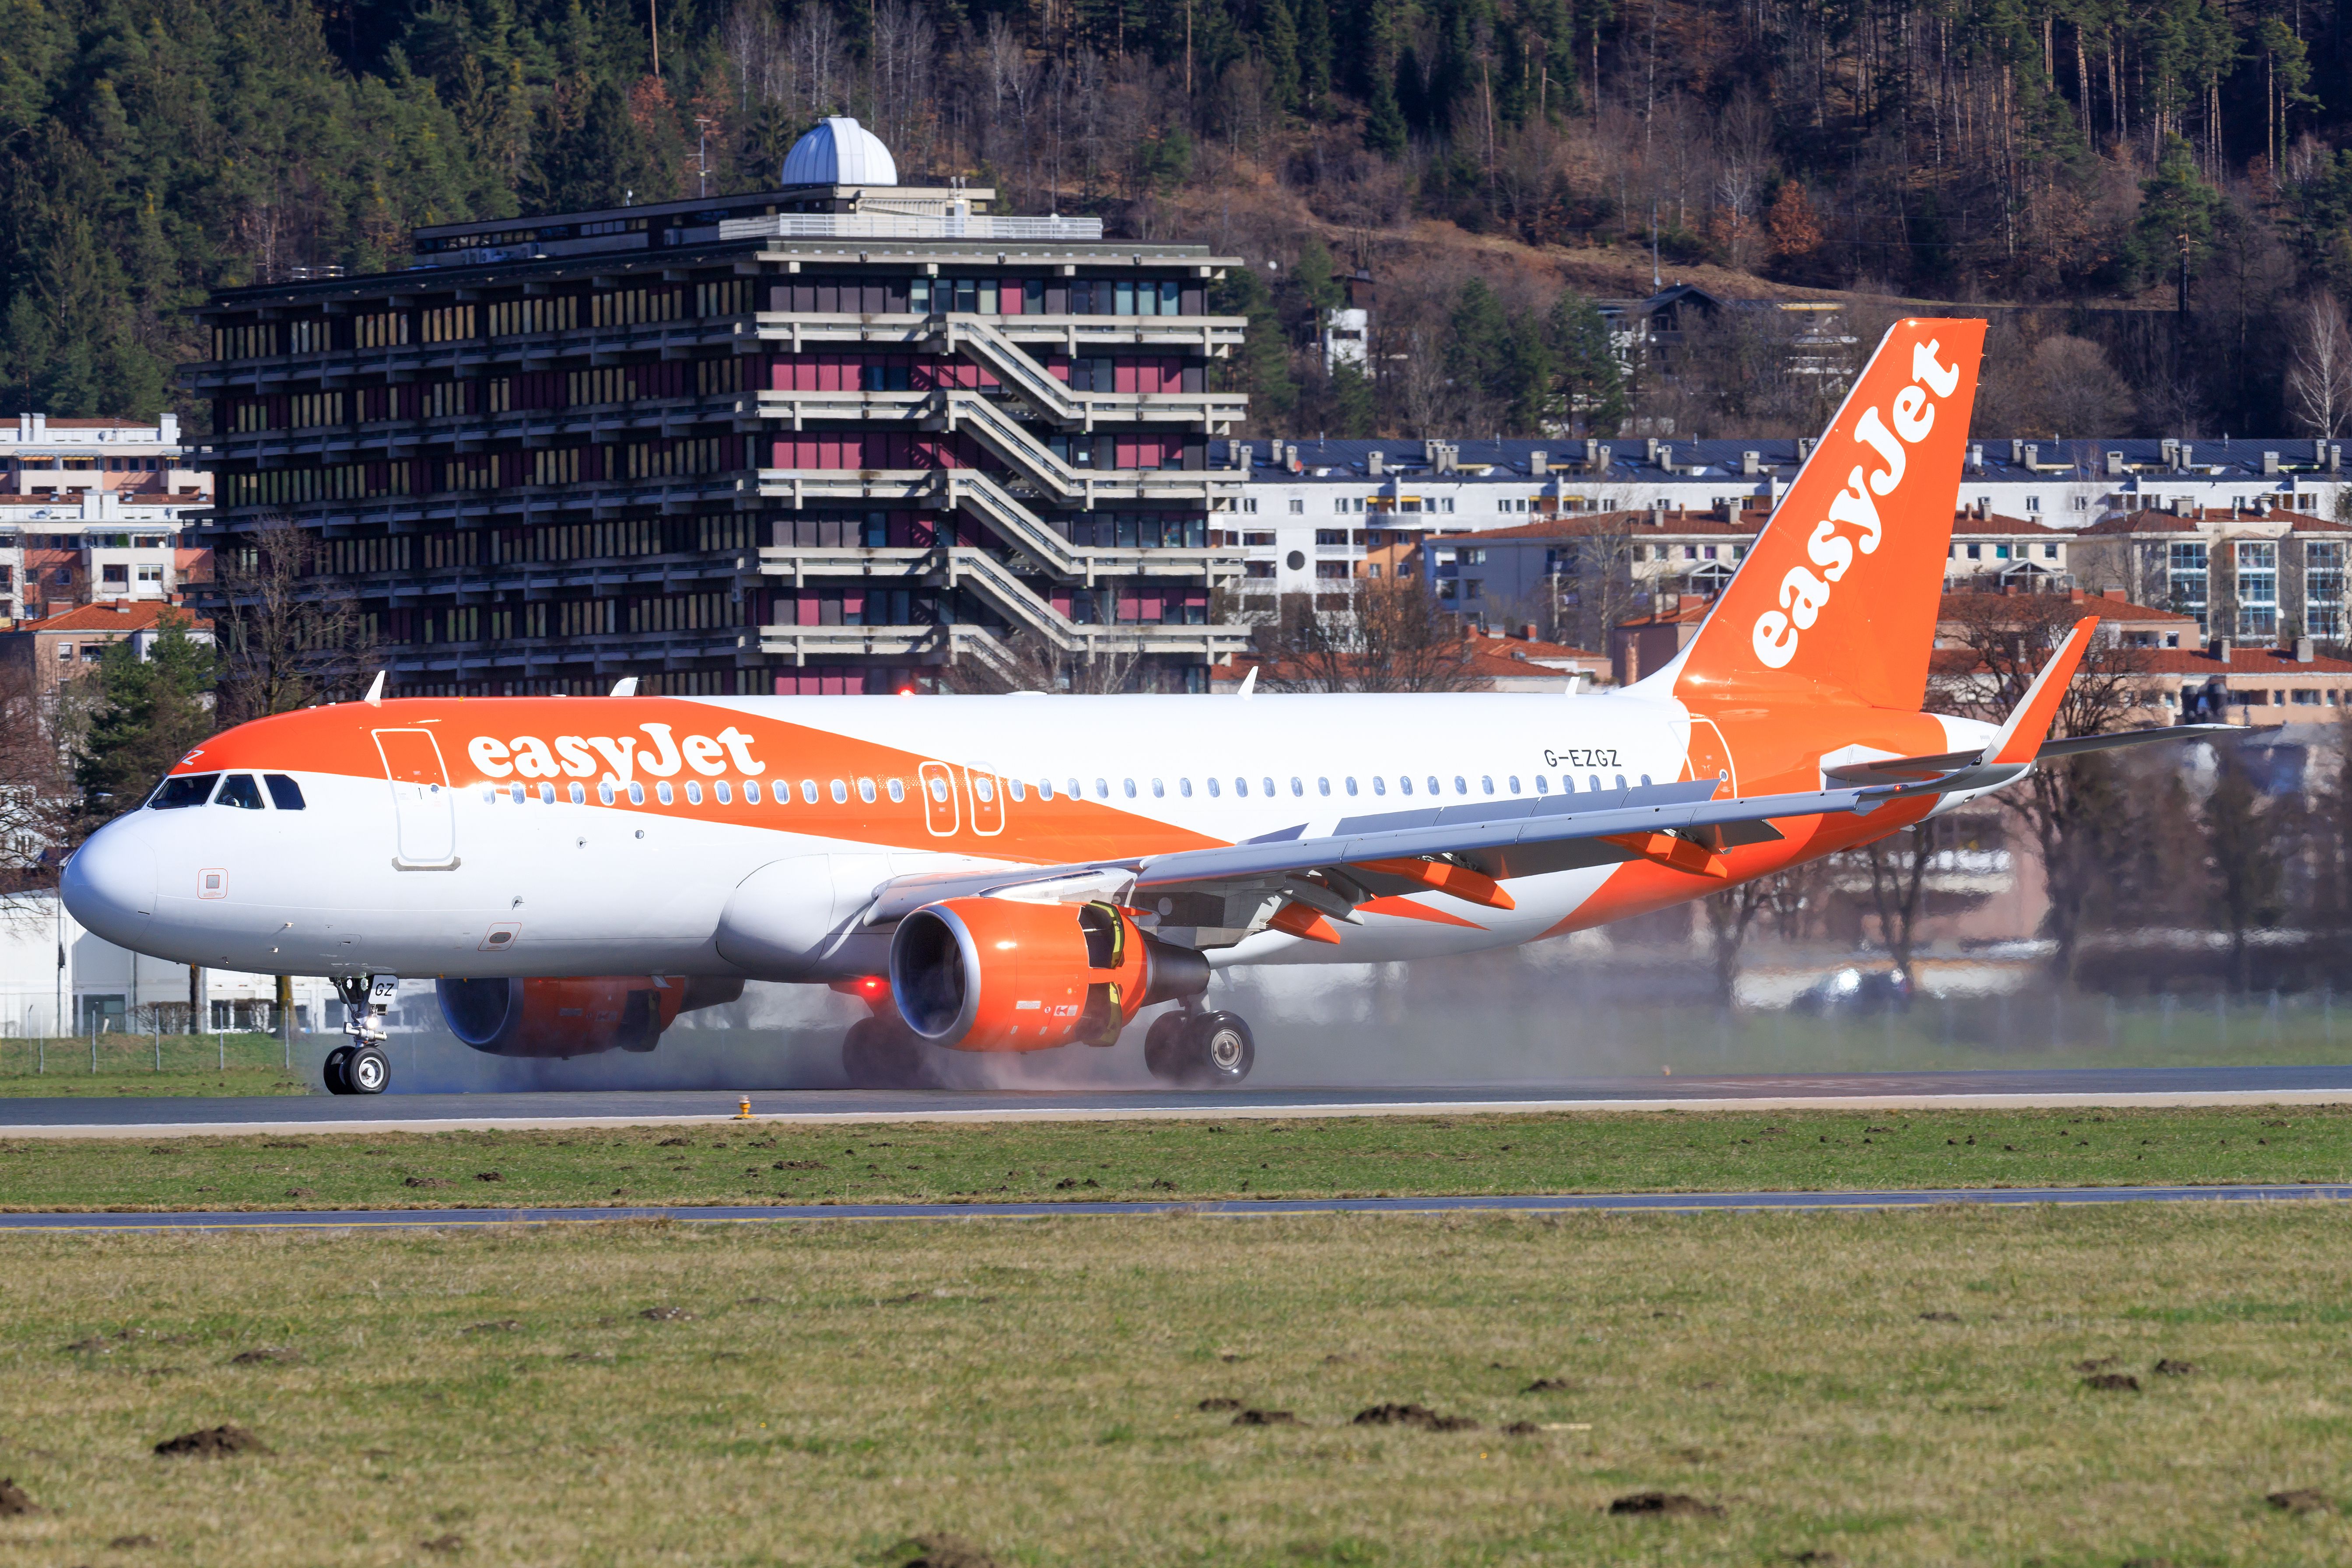 An easyJet Airbus A320 on an airport apron.